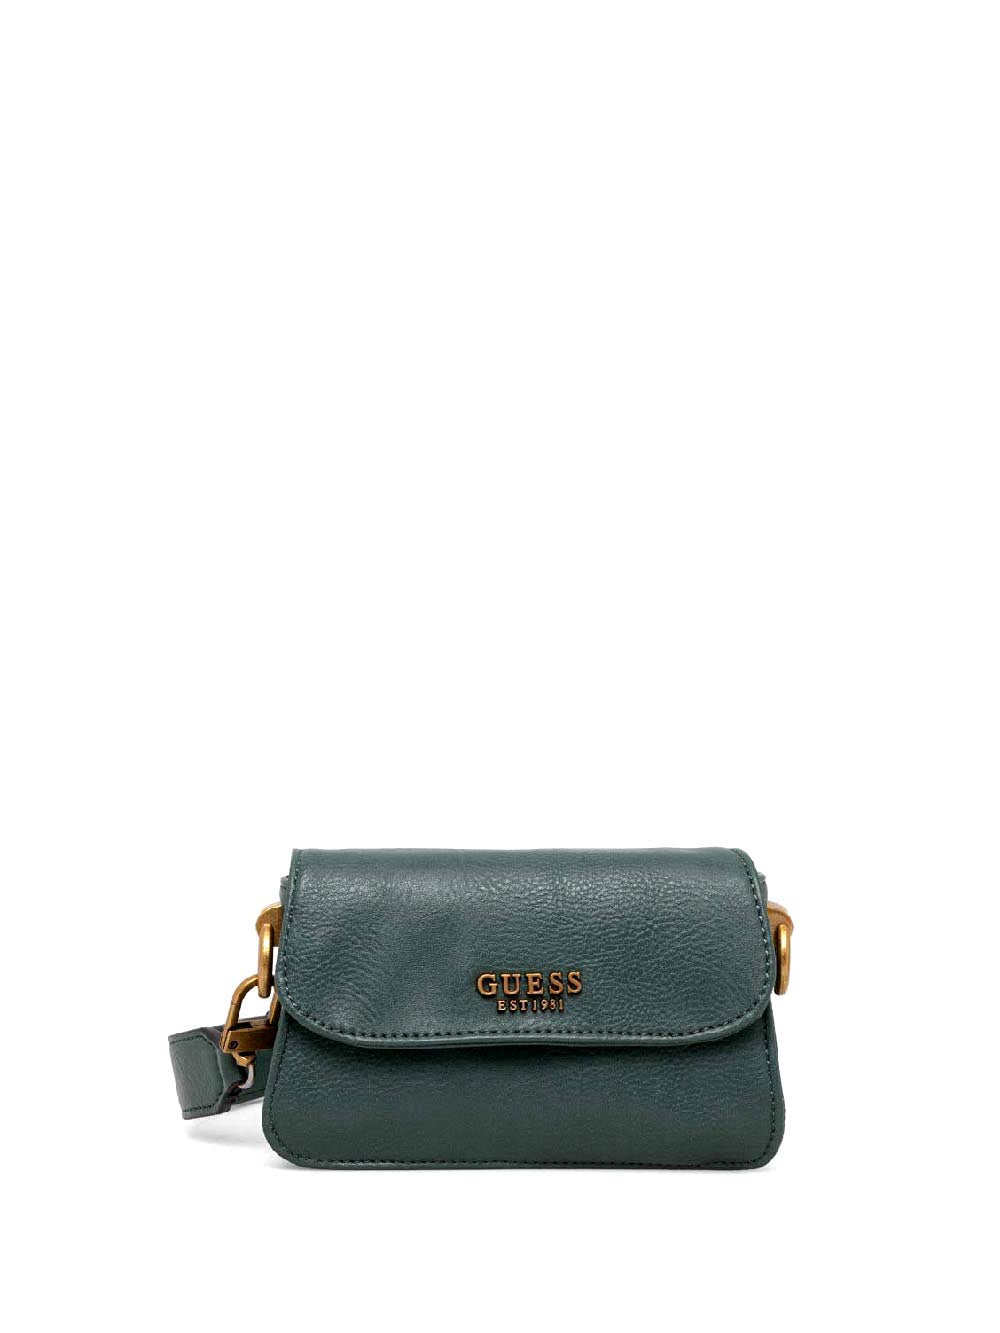 Guess Tracolla Donna Verde